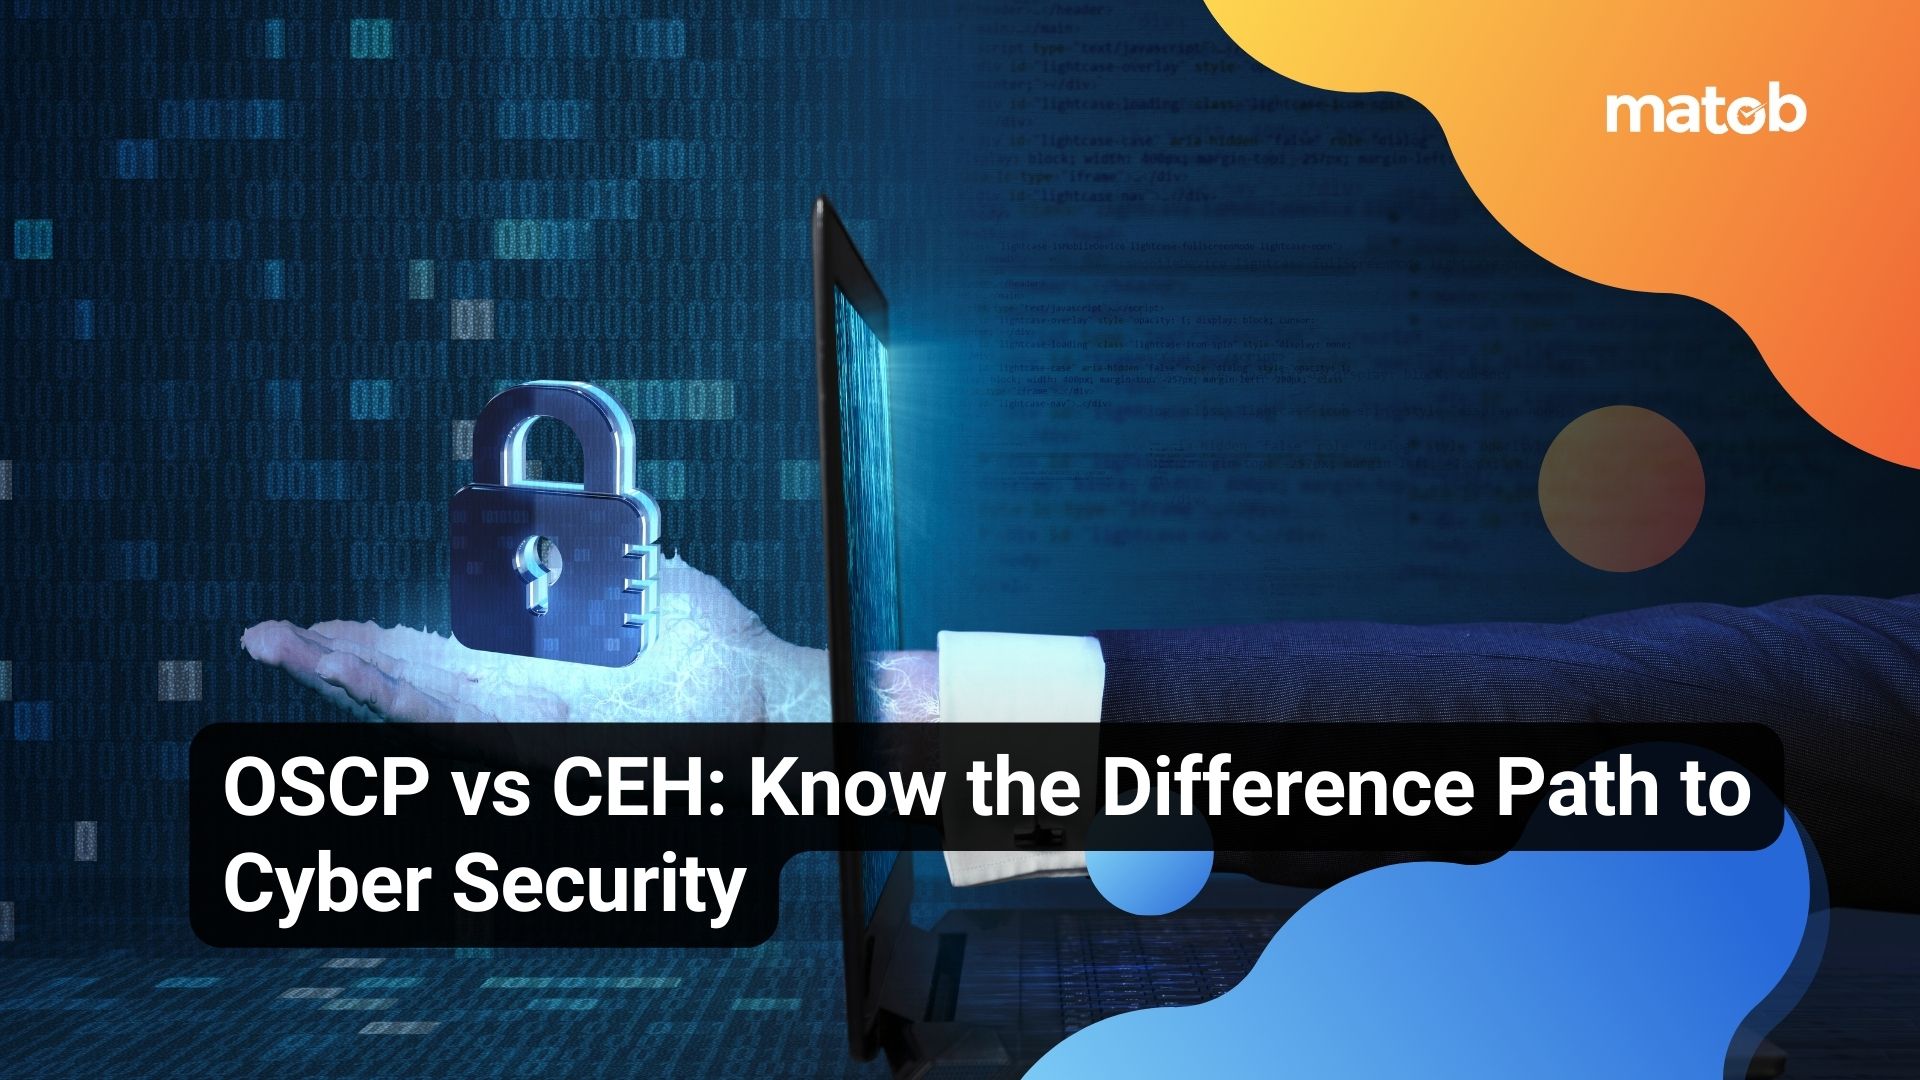 OSCP vs CEH: Know the Difference Path to Cyber Security